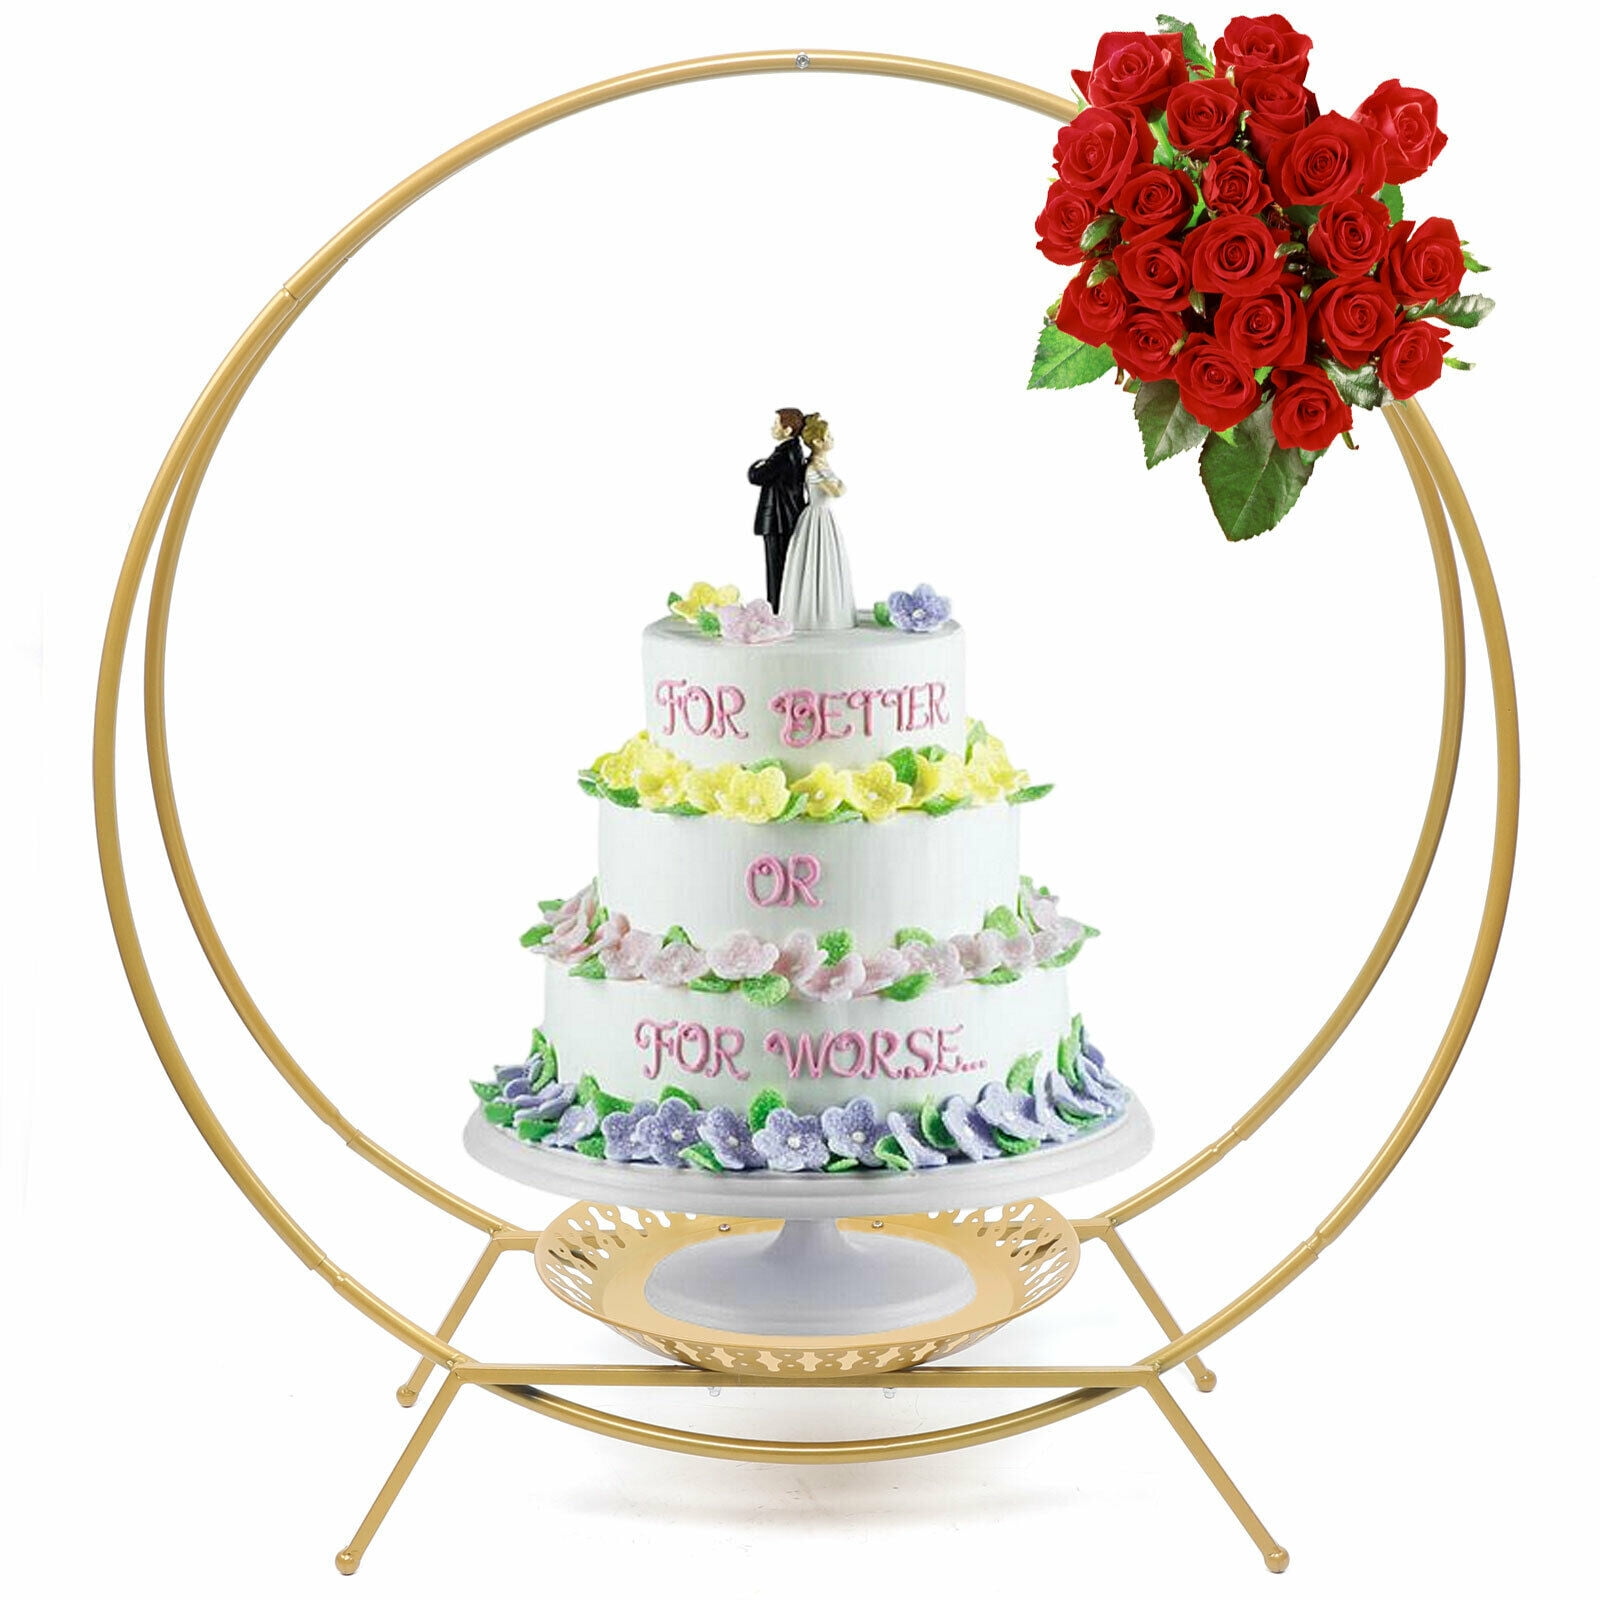 Wedding Cake With Dried Floral Ring — The Baked Studio | The Home of Cake  Art | Cake Decorating Supplies - Cake Decorating Equipment - Artistic Cake  Decorations - DIY Cake Decorating - Artificial Flowers - Cake Toppers | UK